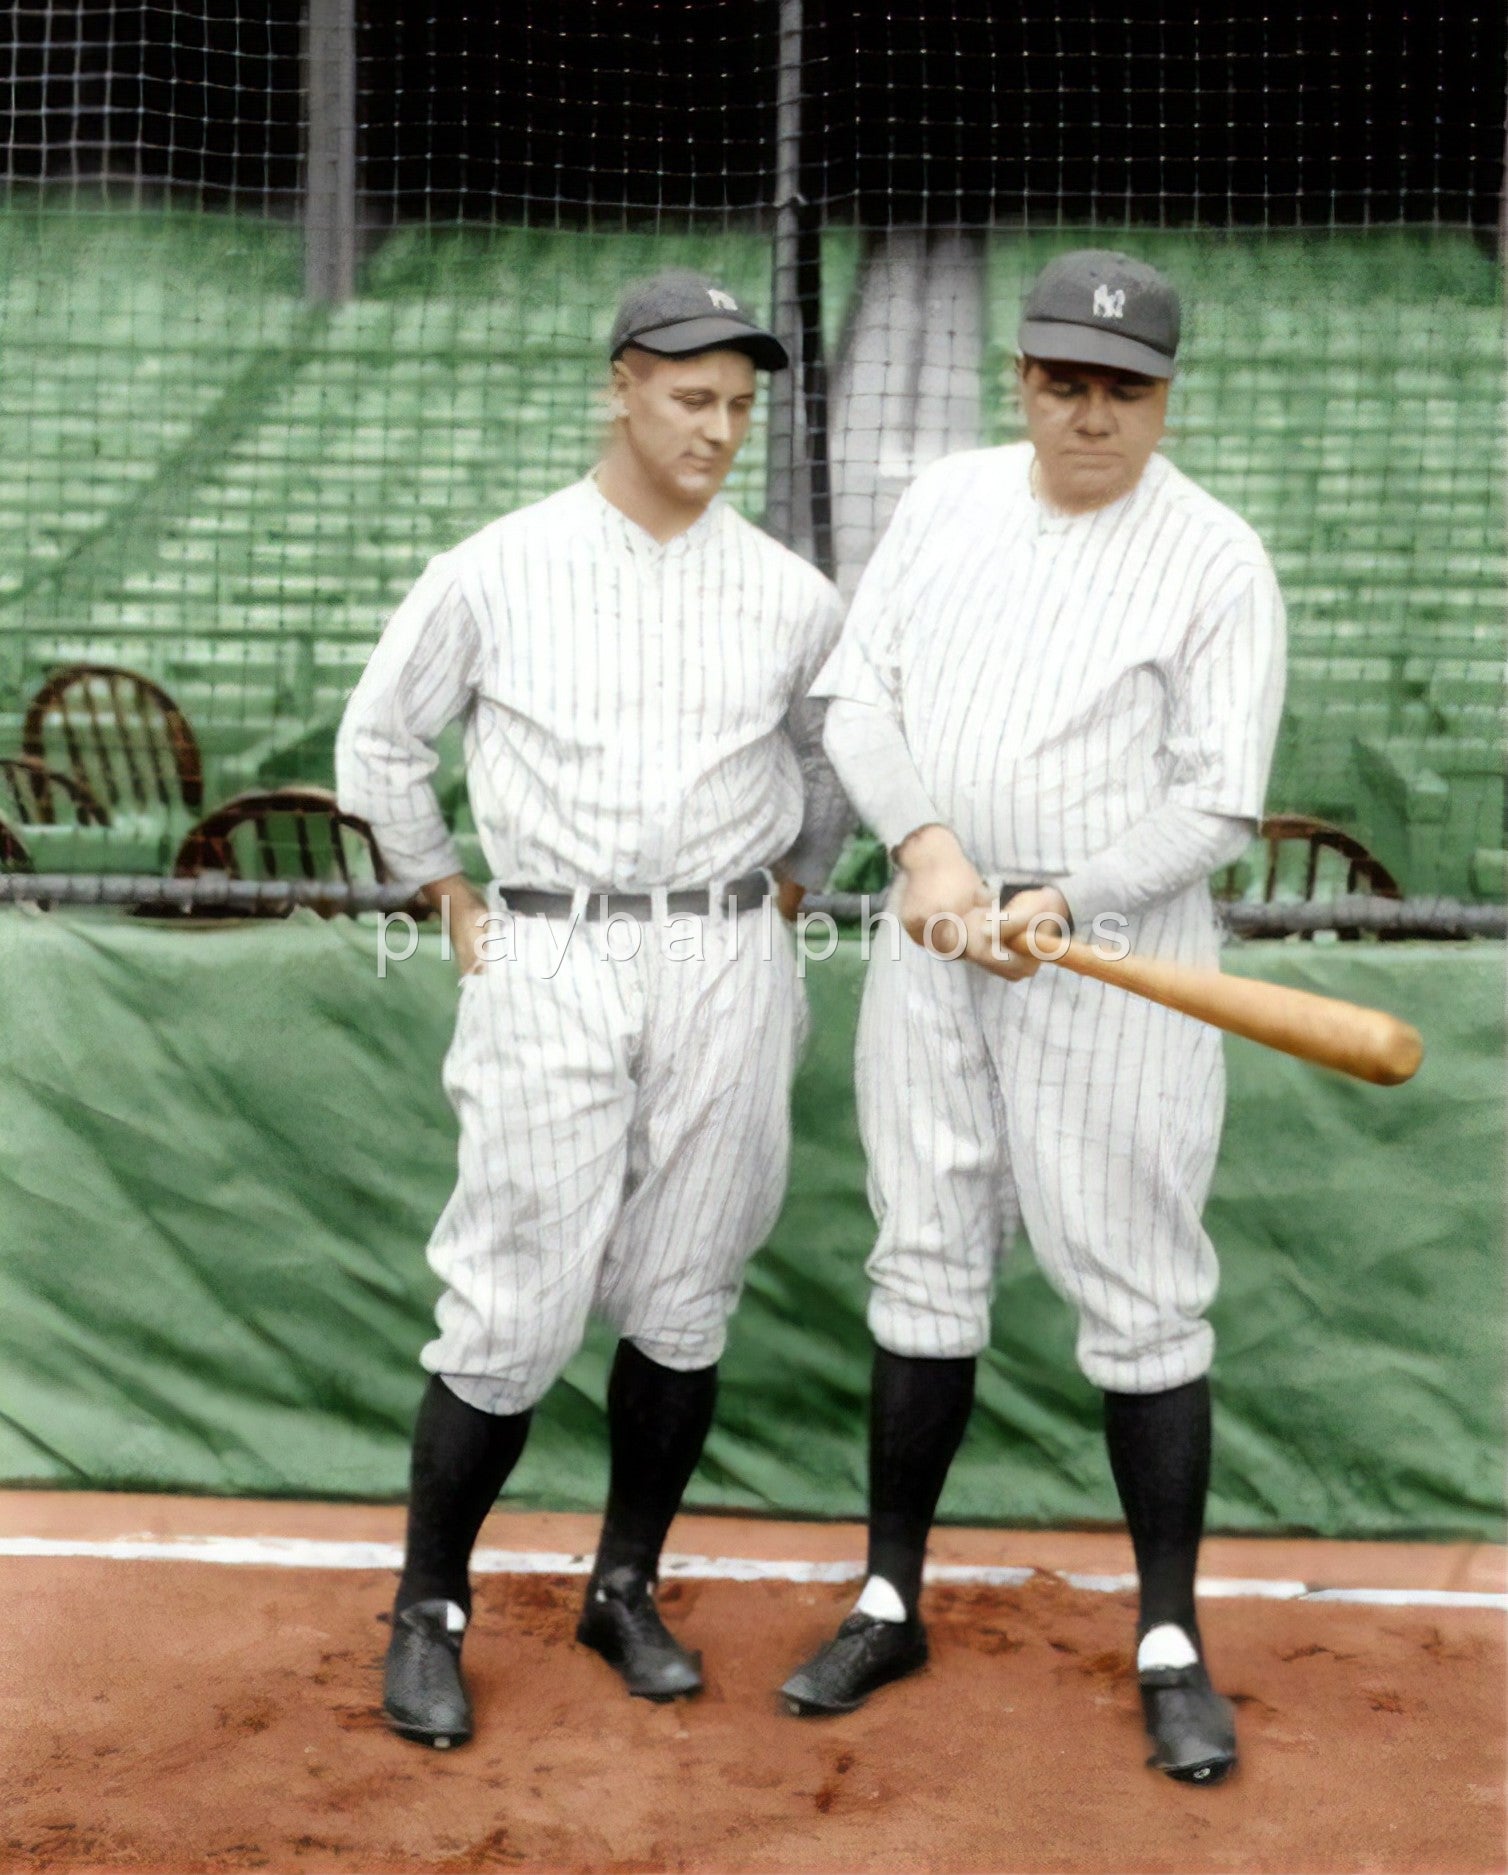 Lou Gehrig and Babe Ruth Colorized